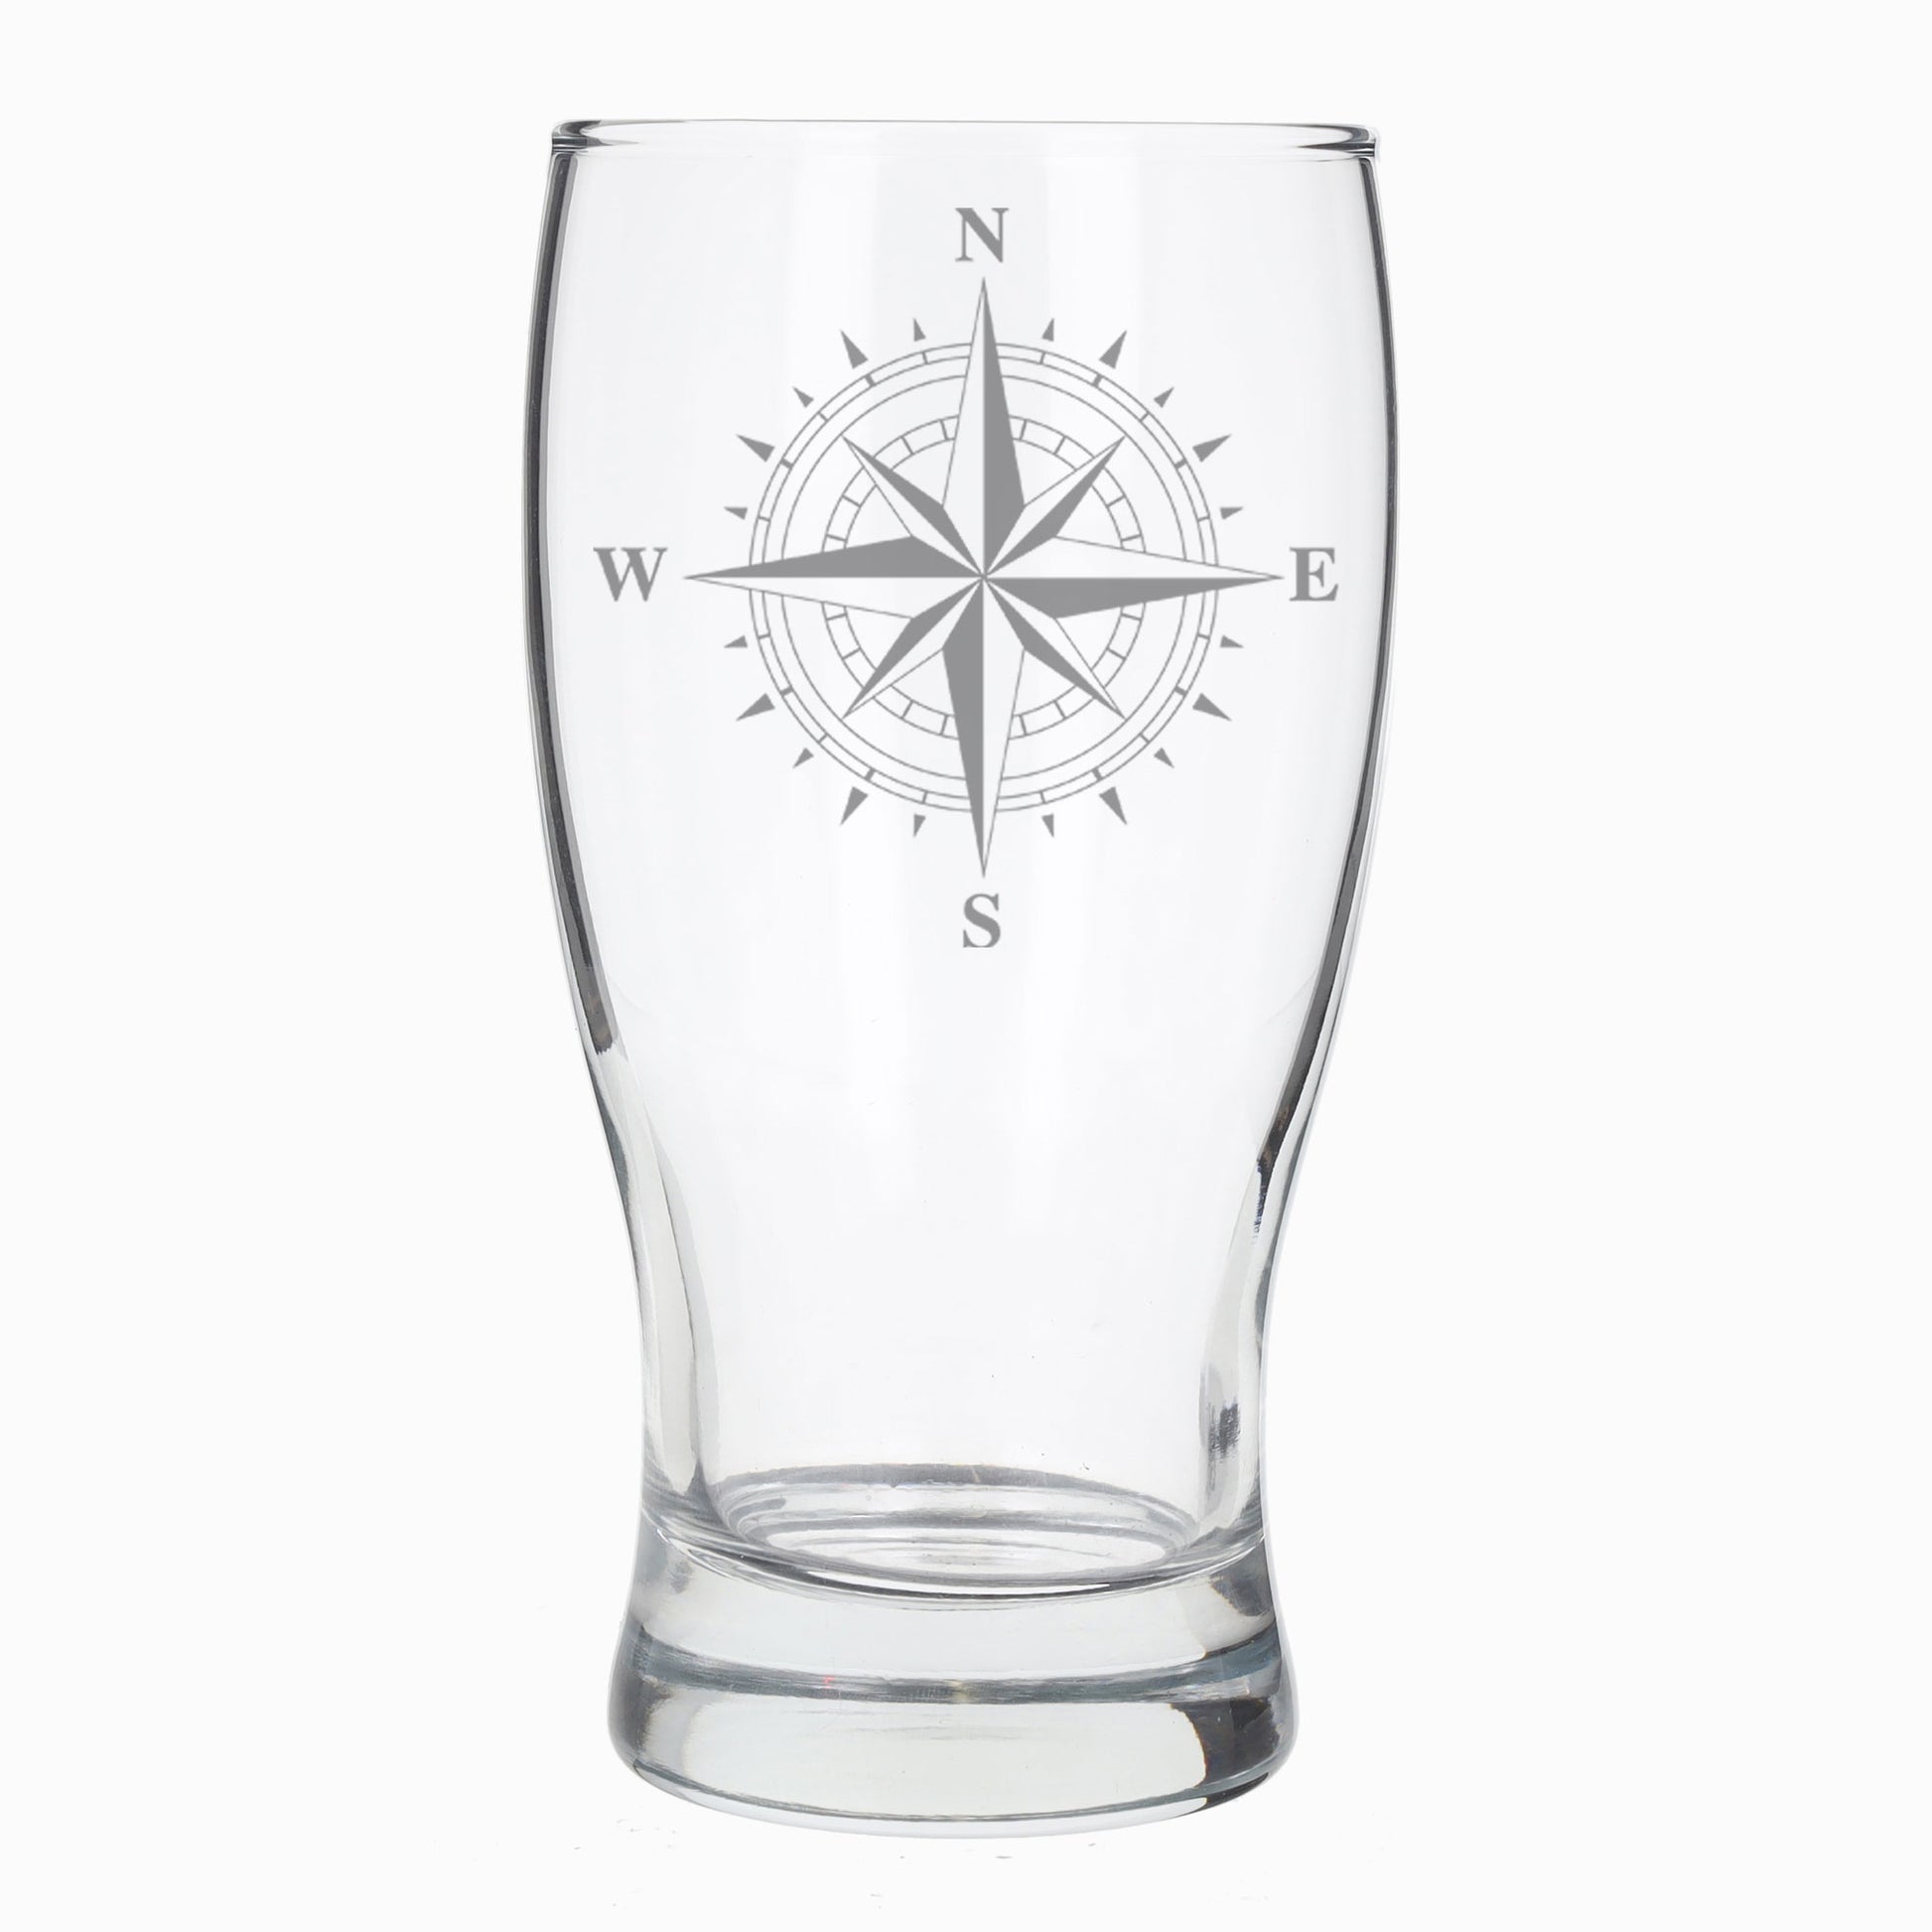 Compass Engraved Beer Pint Glass and/or Coaster Set  - Always Looking Good - Pint Glass Only  